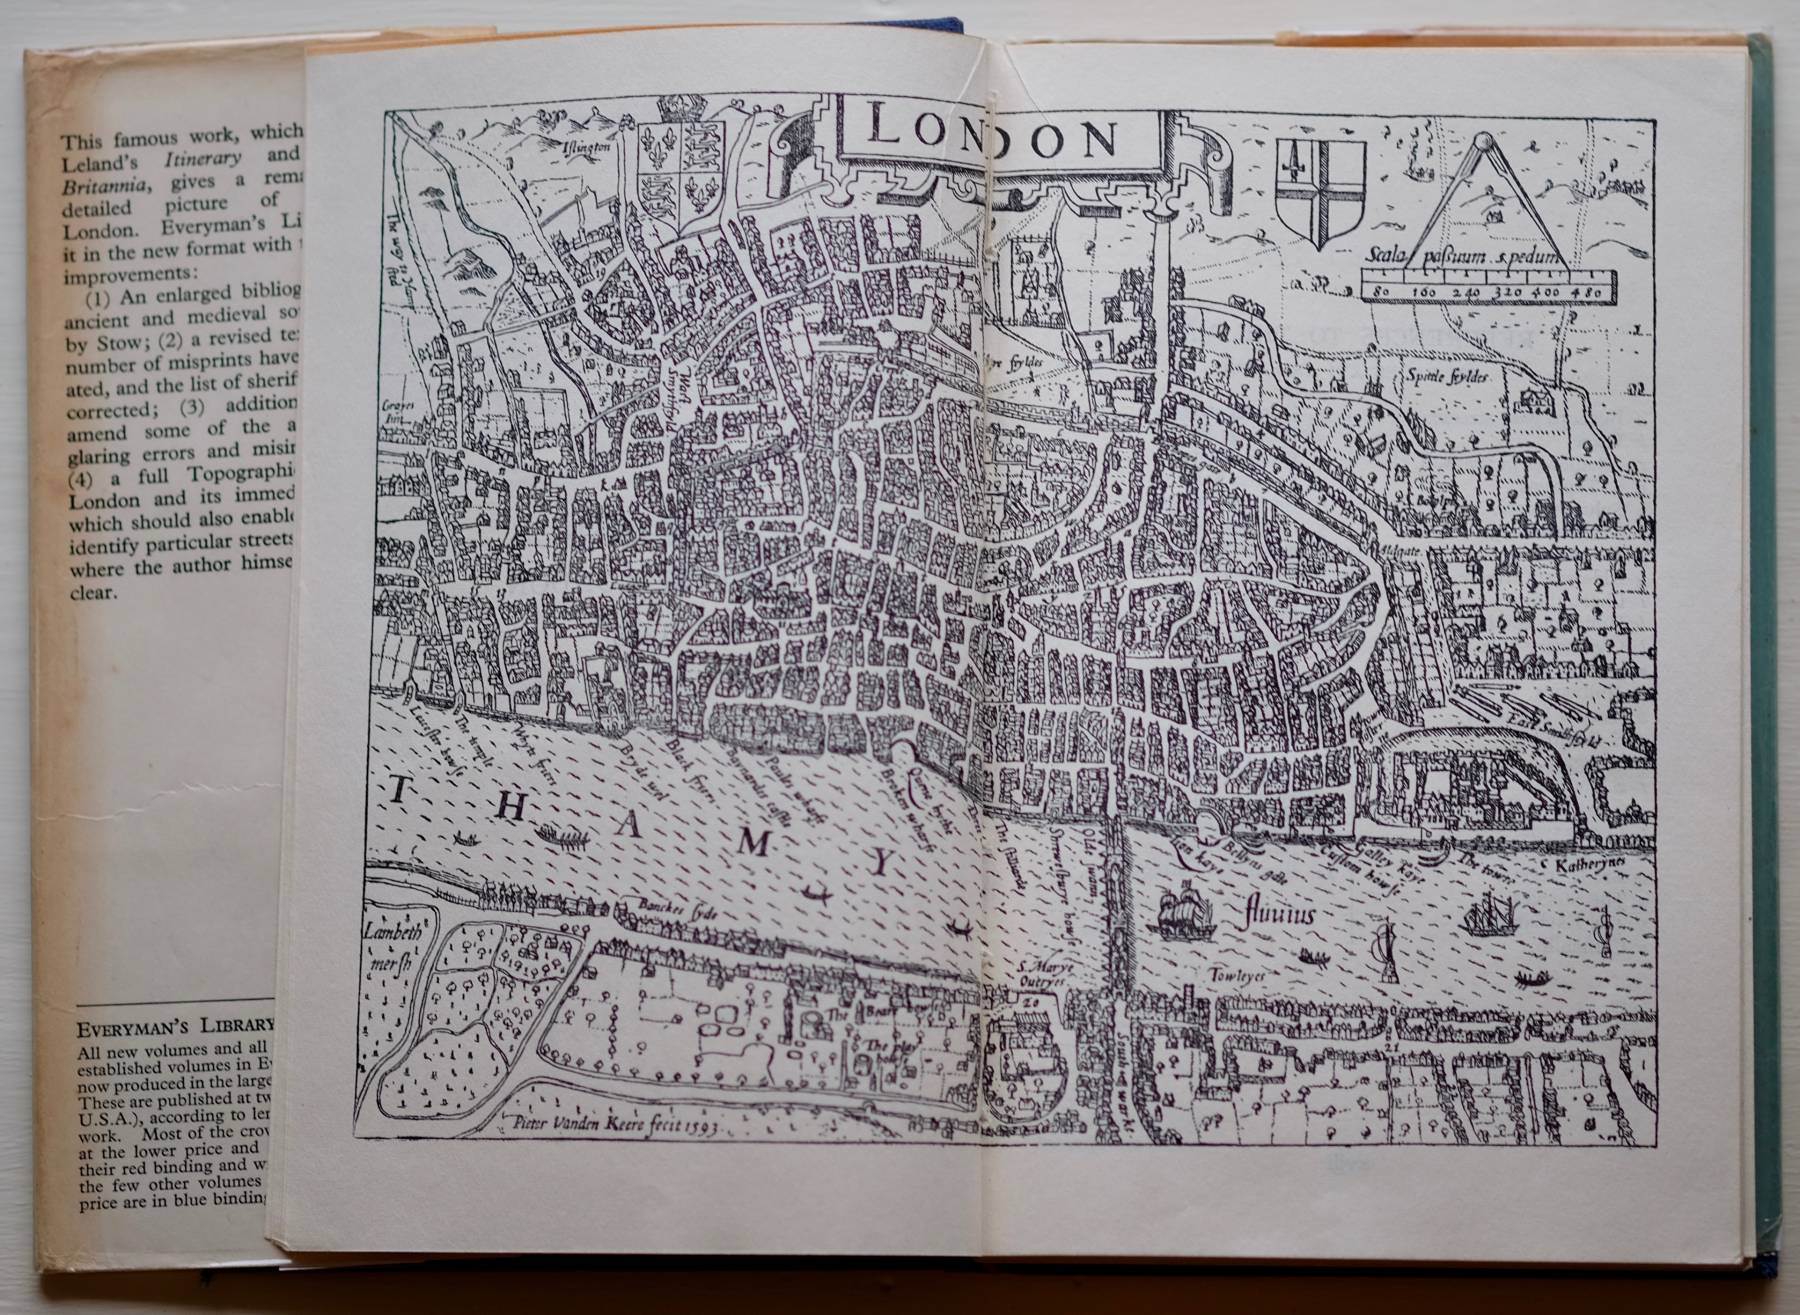 Stow's Survey of London